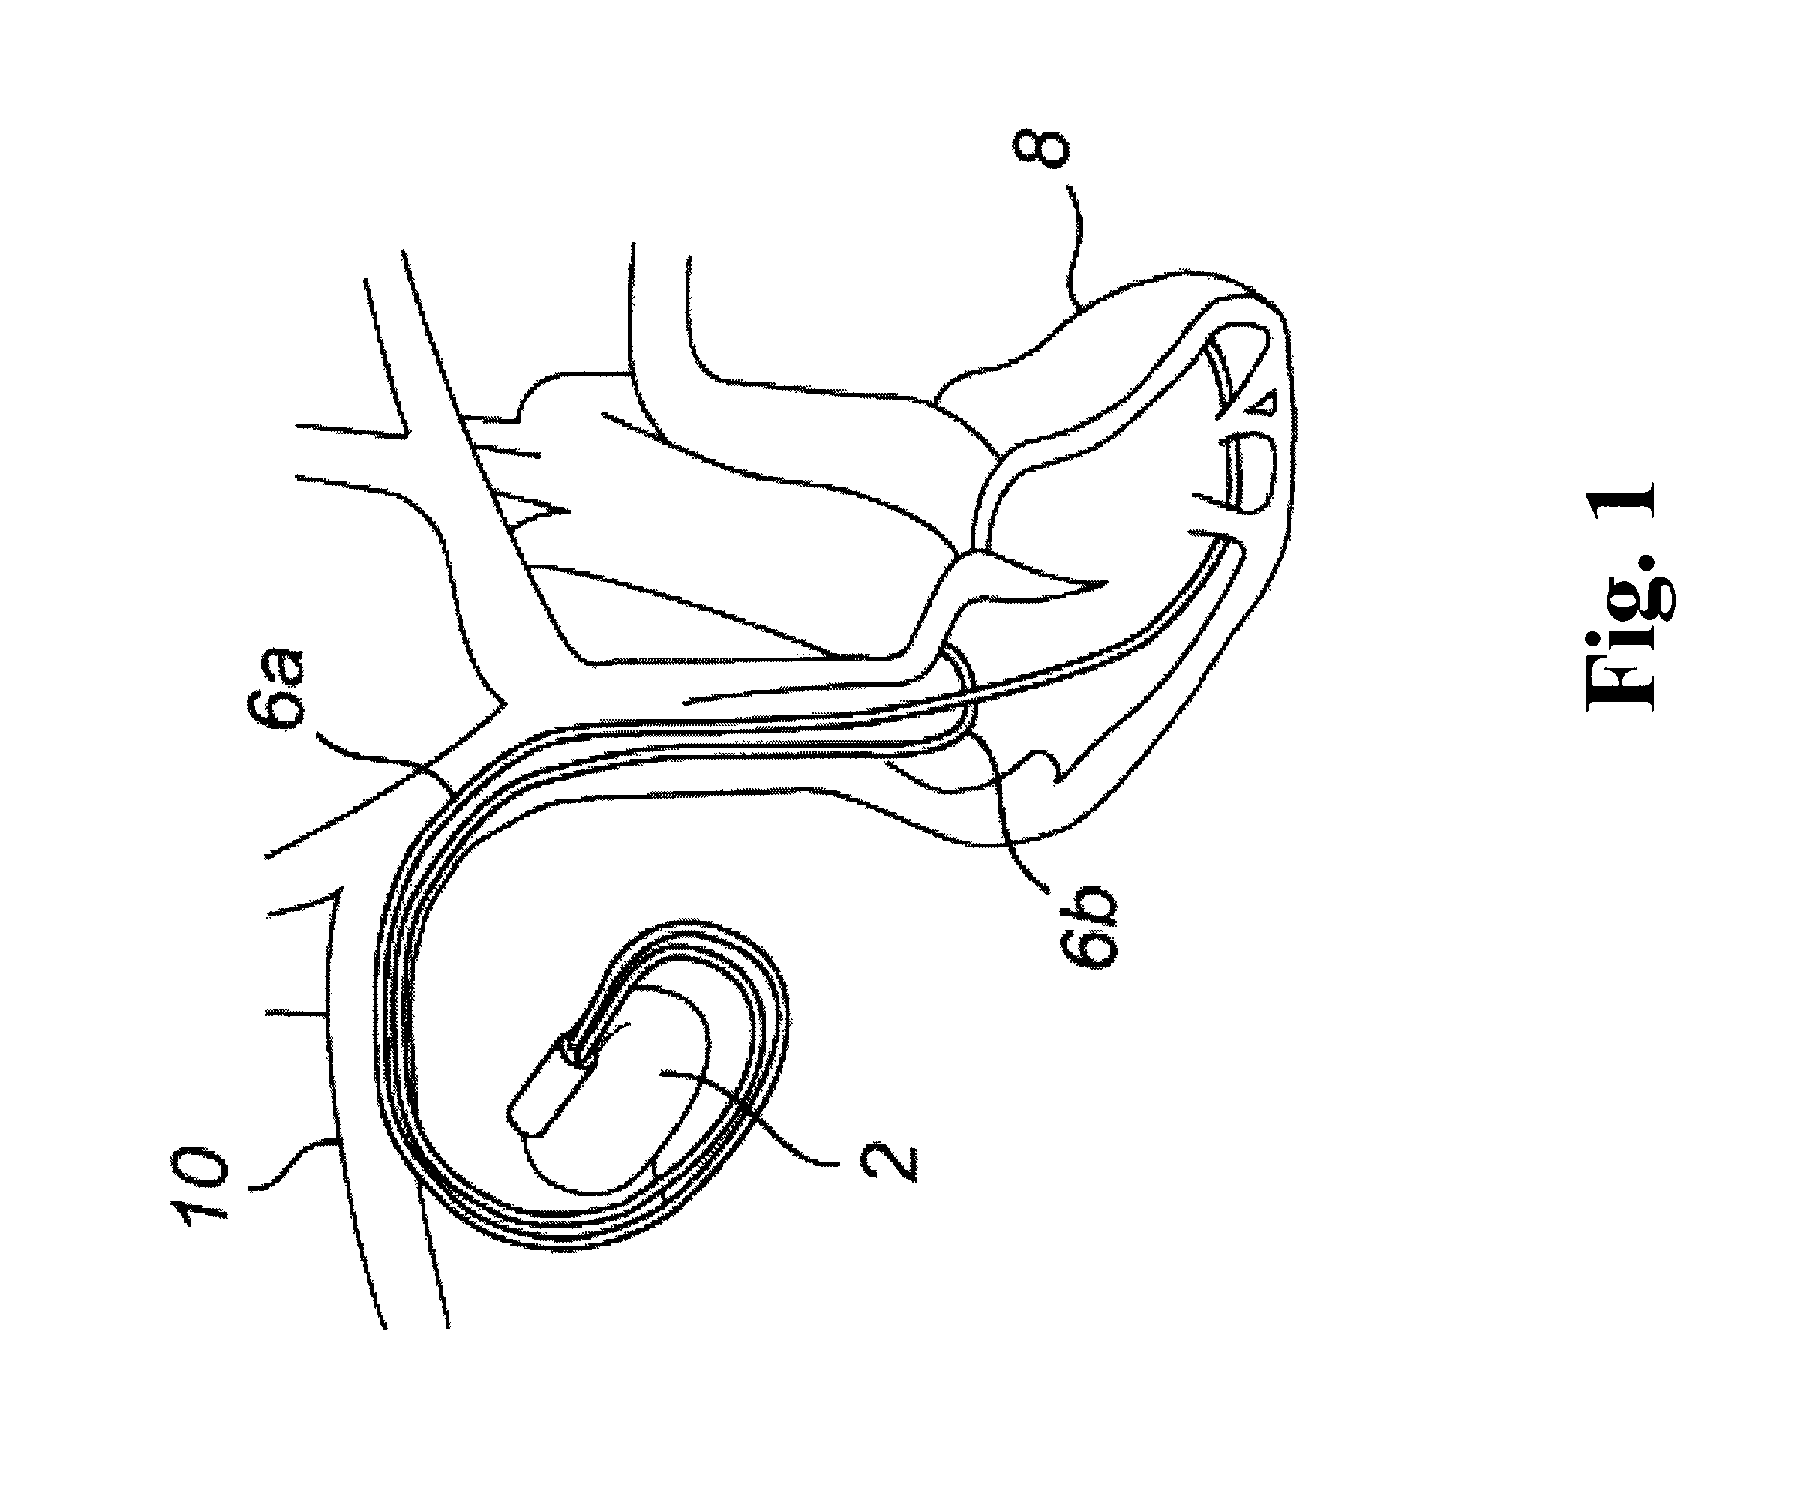 Dual chamber pacemaker